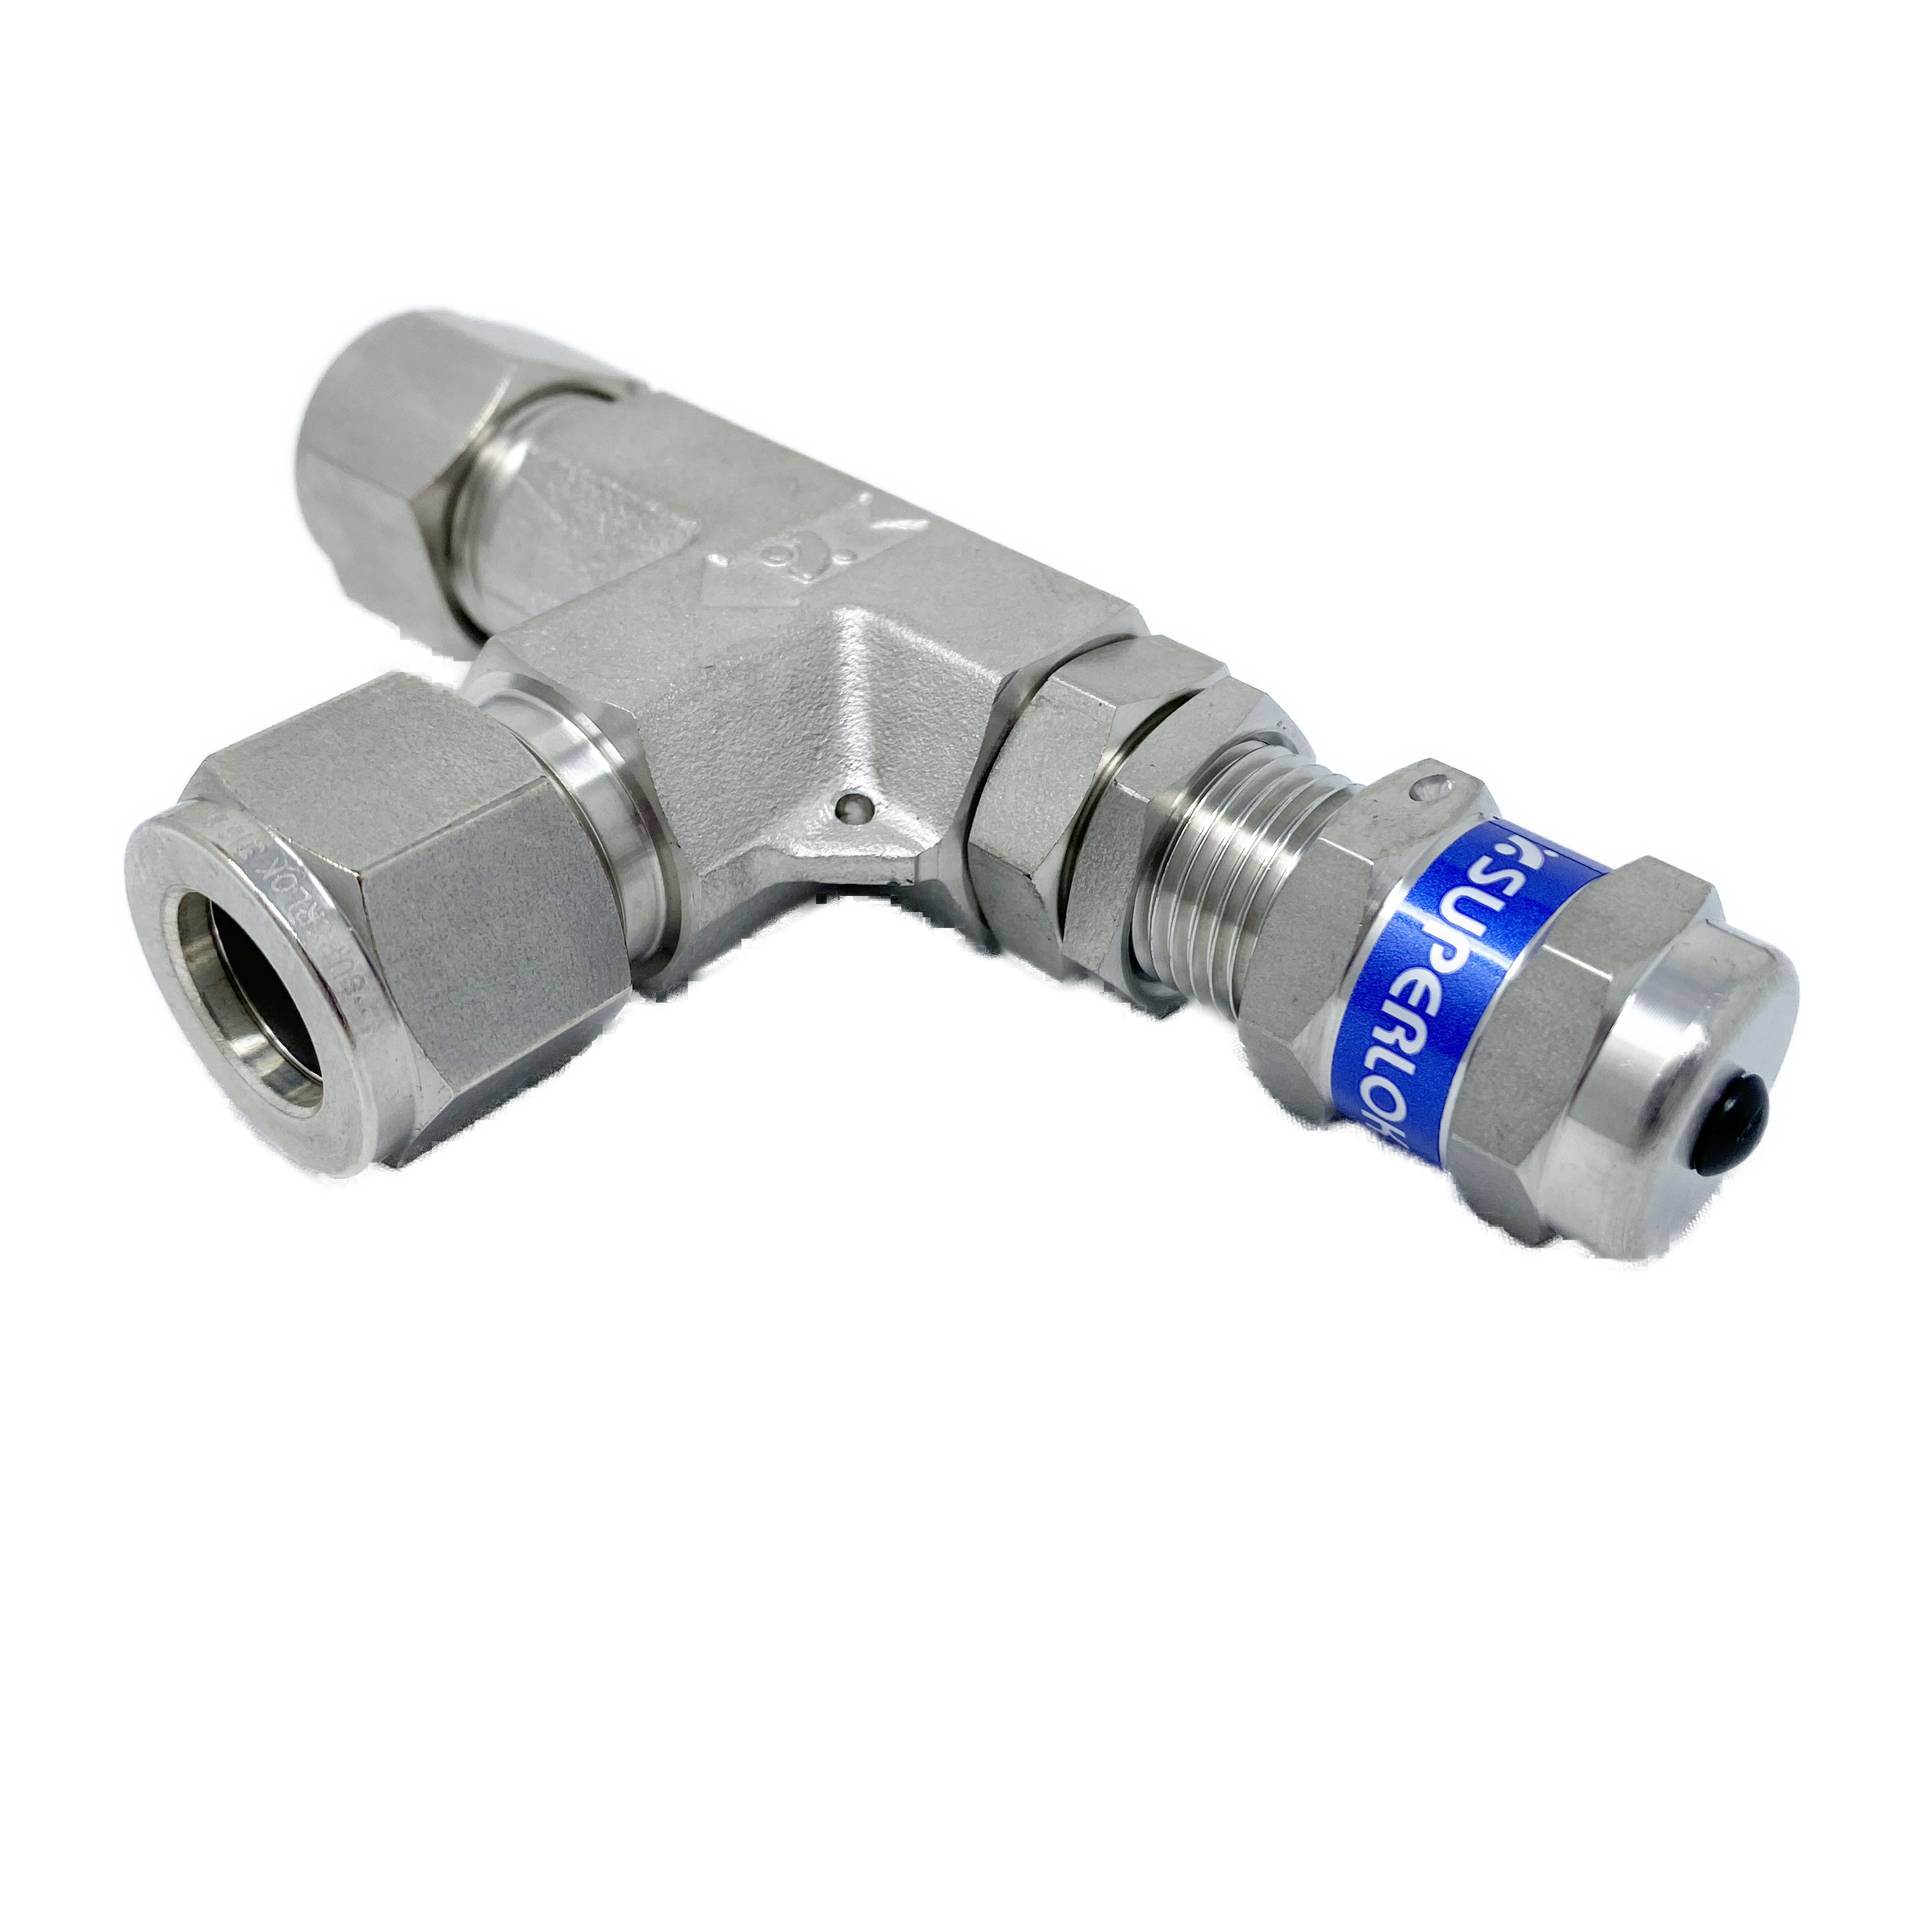 SRVL-S-8 : Superlok Inline Relief Valve, 1/2" O.D. Tube, Angle Pattern, Low Pressure, 300psi, 316SS, No Spring